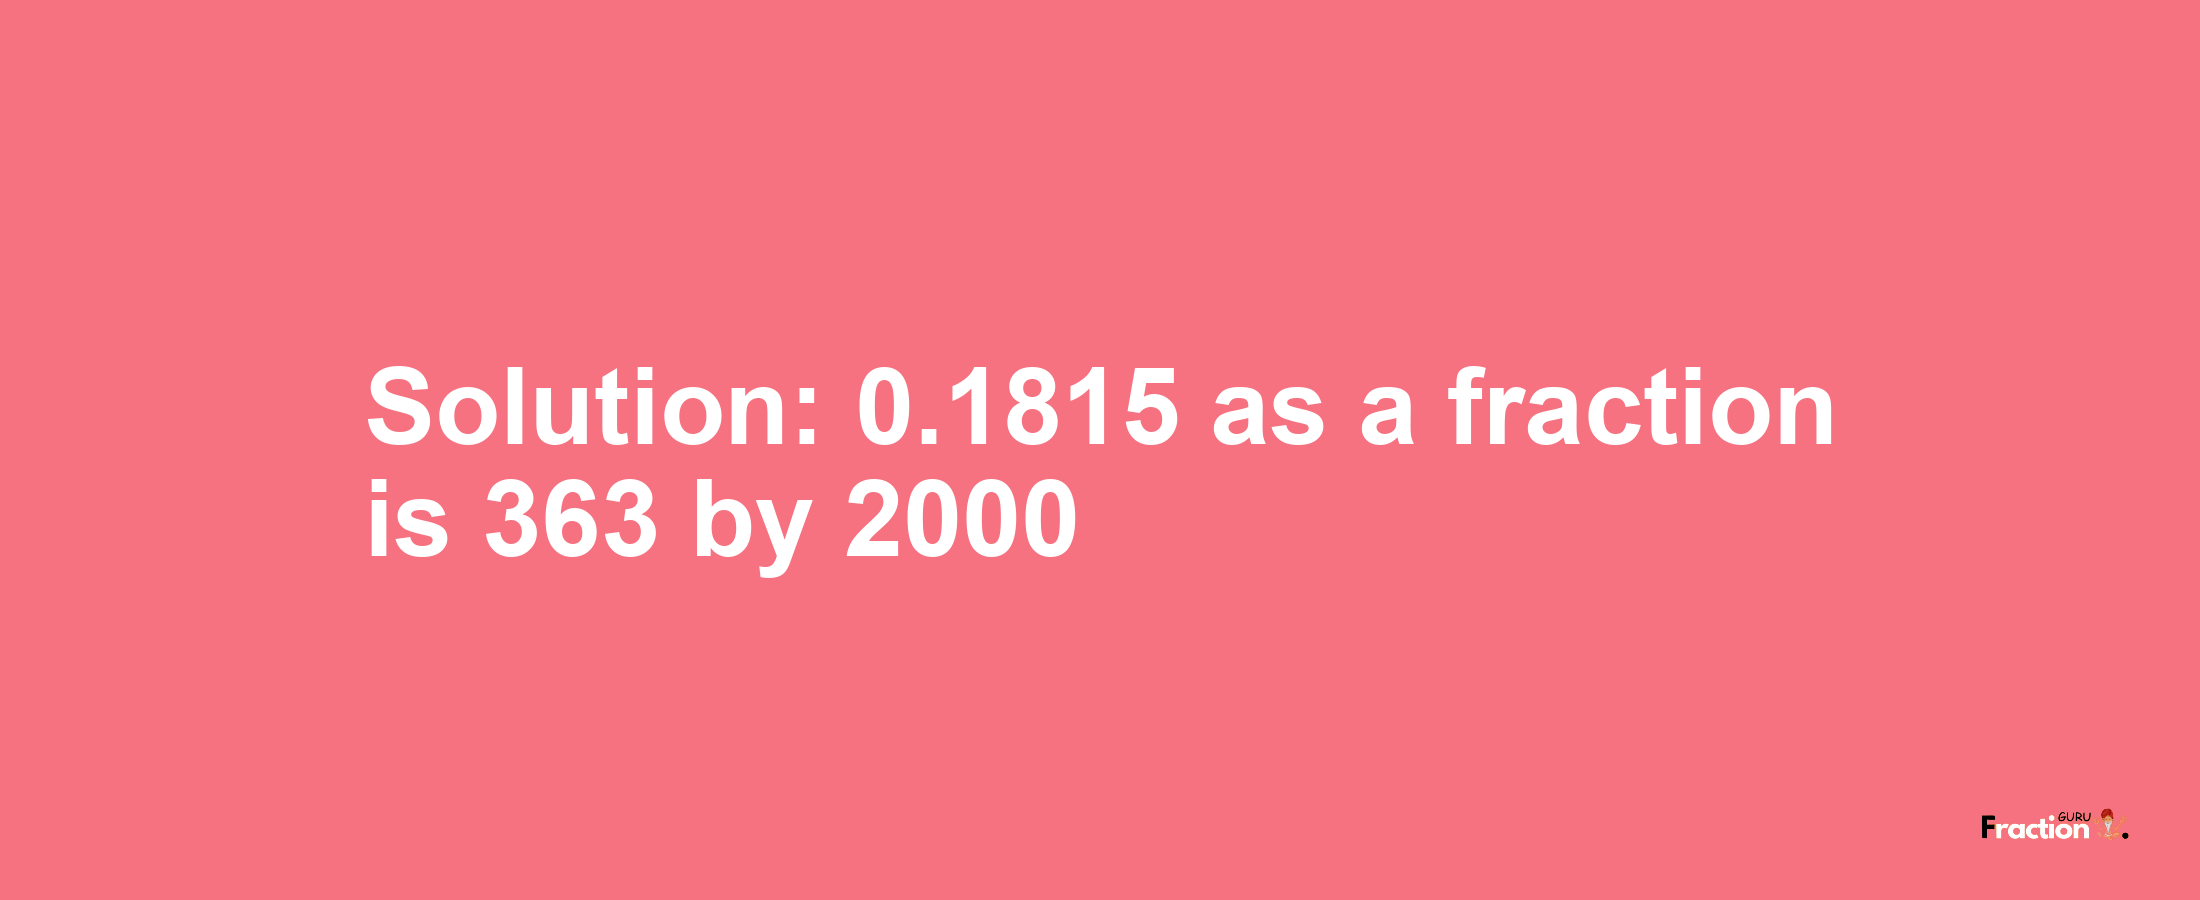 Solution:0.1815 as a fraction is 363/2000